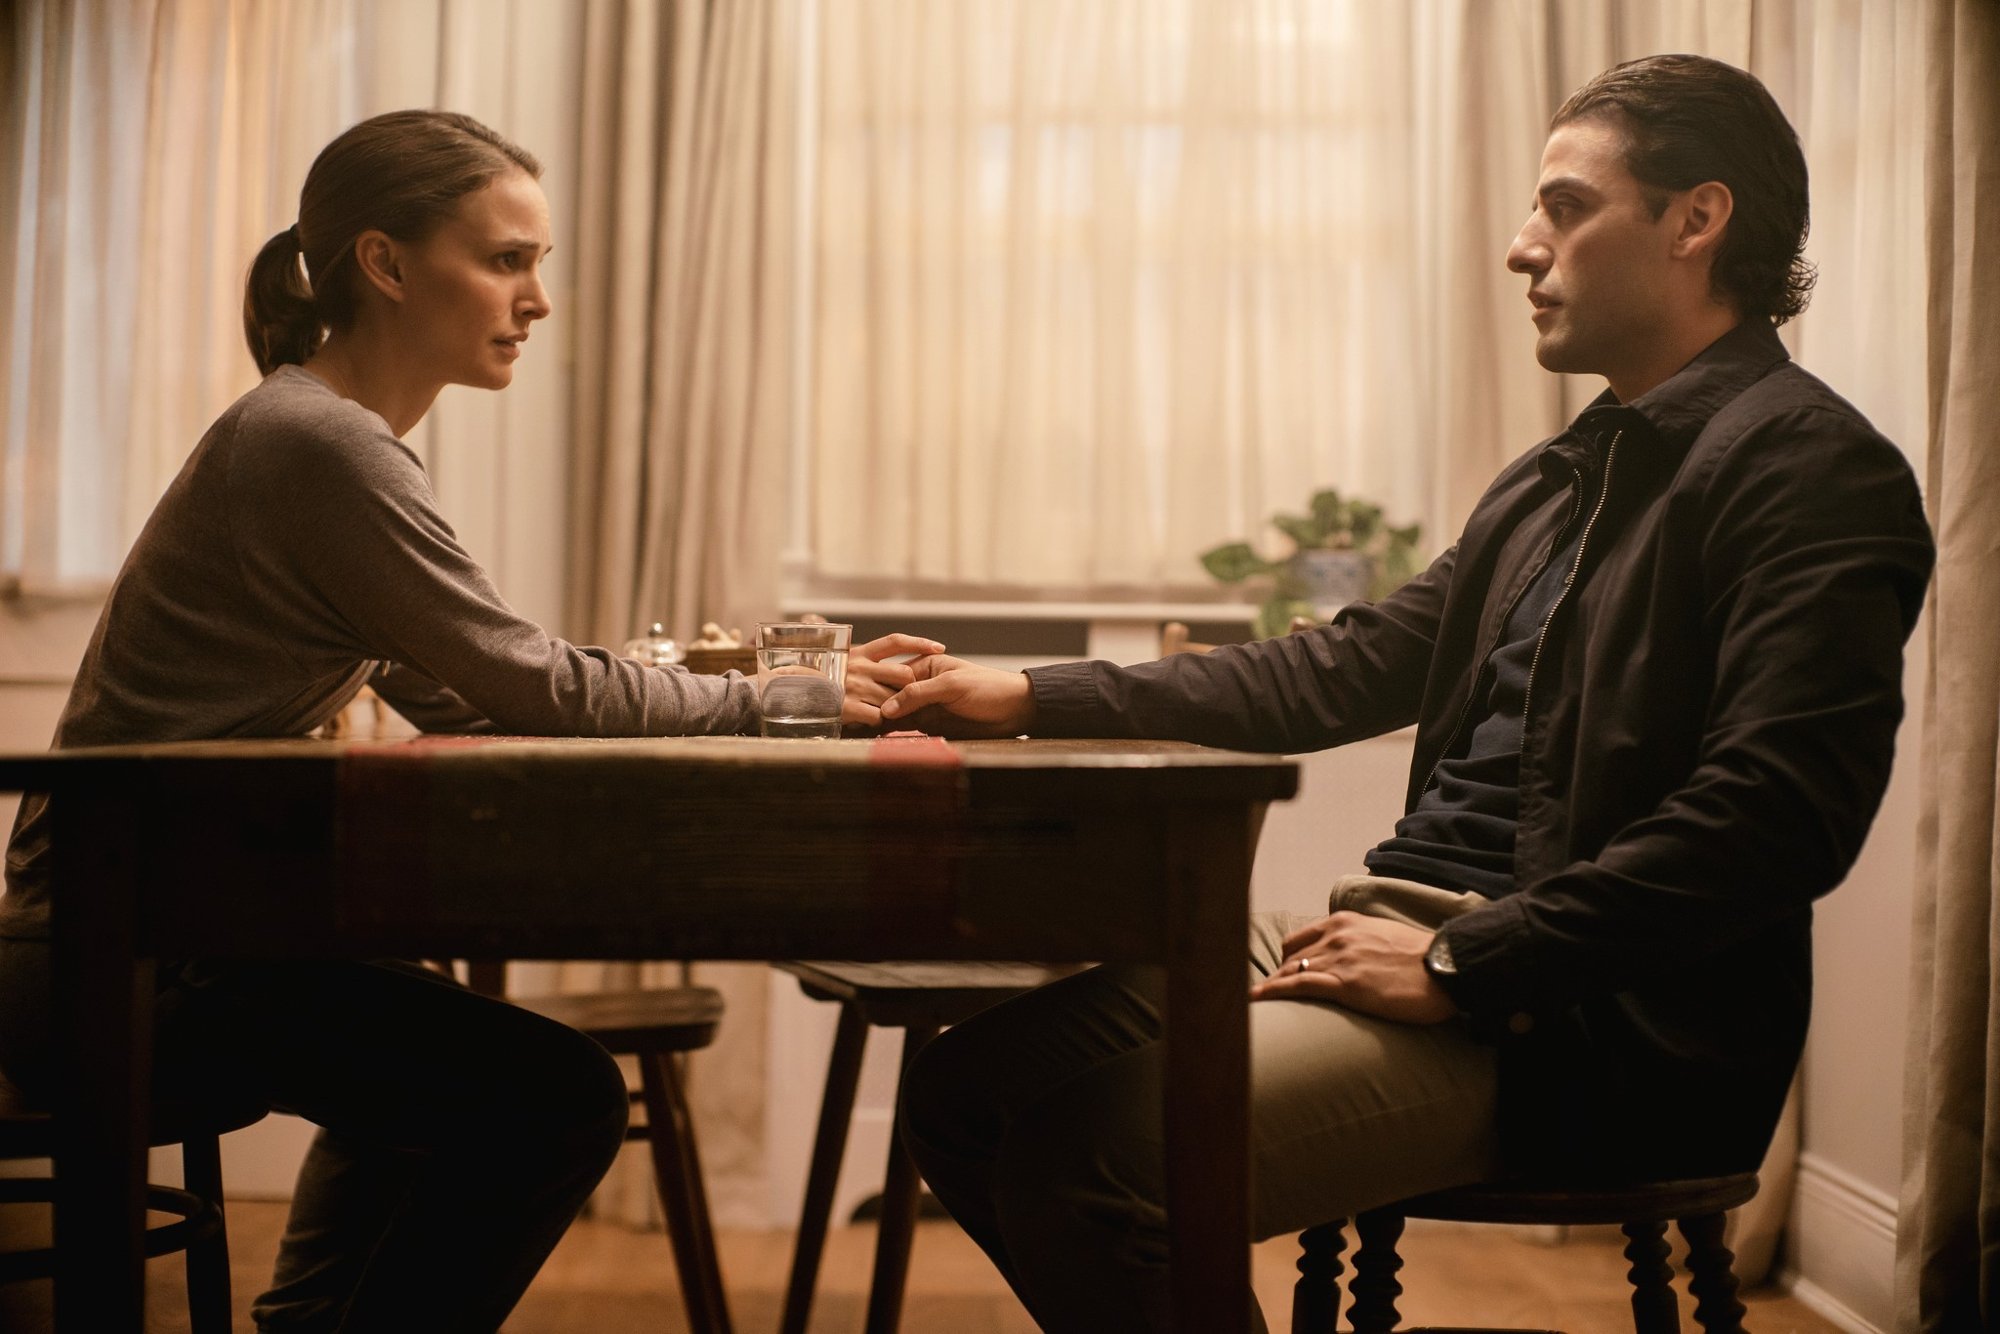 Natalie Portman stars as Lena and Oscar Isaac stars as Lena's Husband in Paramount Pictures' Annihilation (2018)